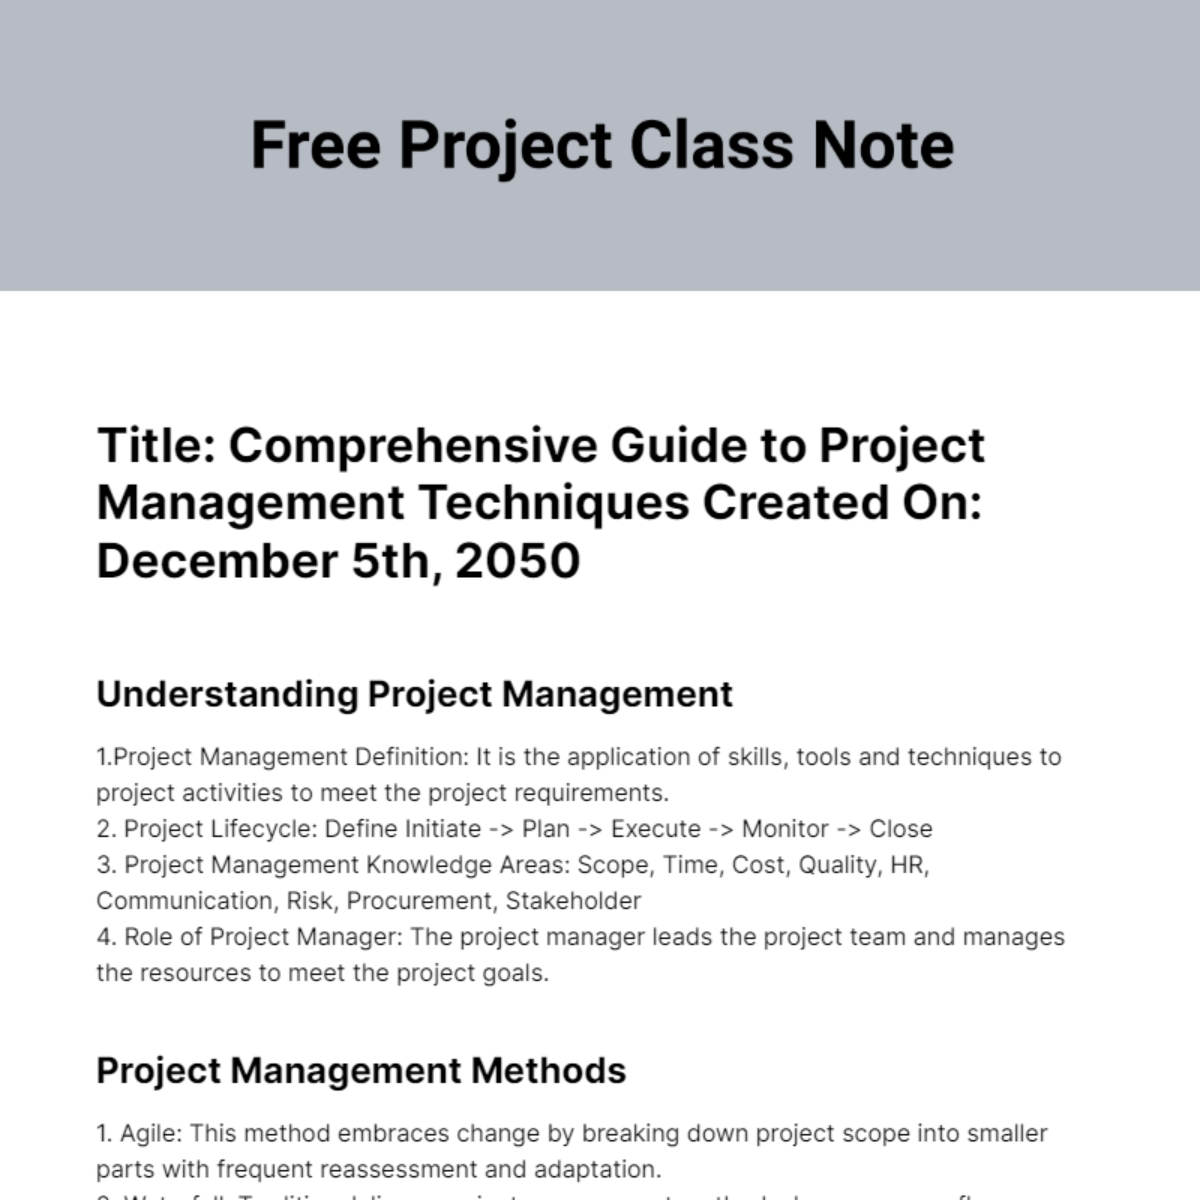 Free Project Class Note Template